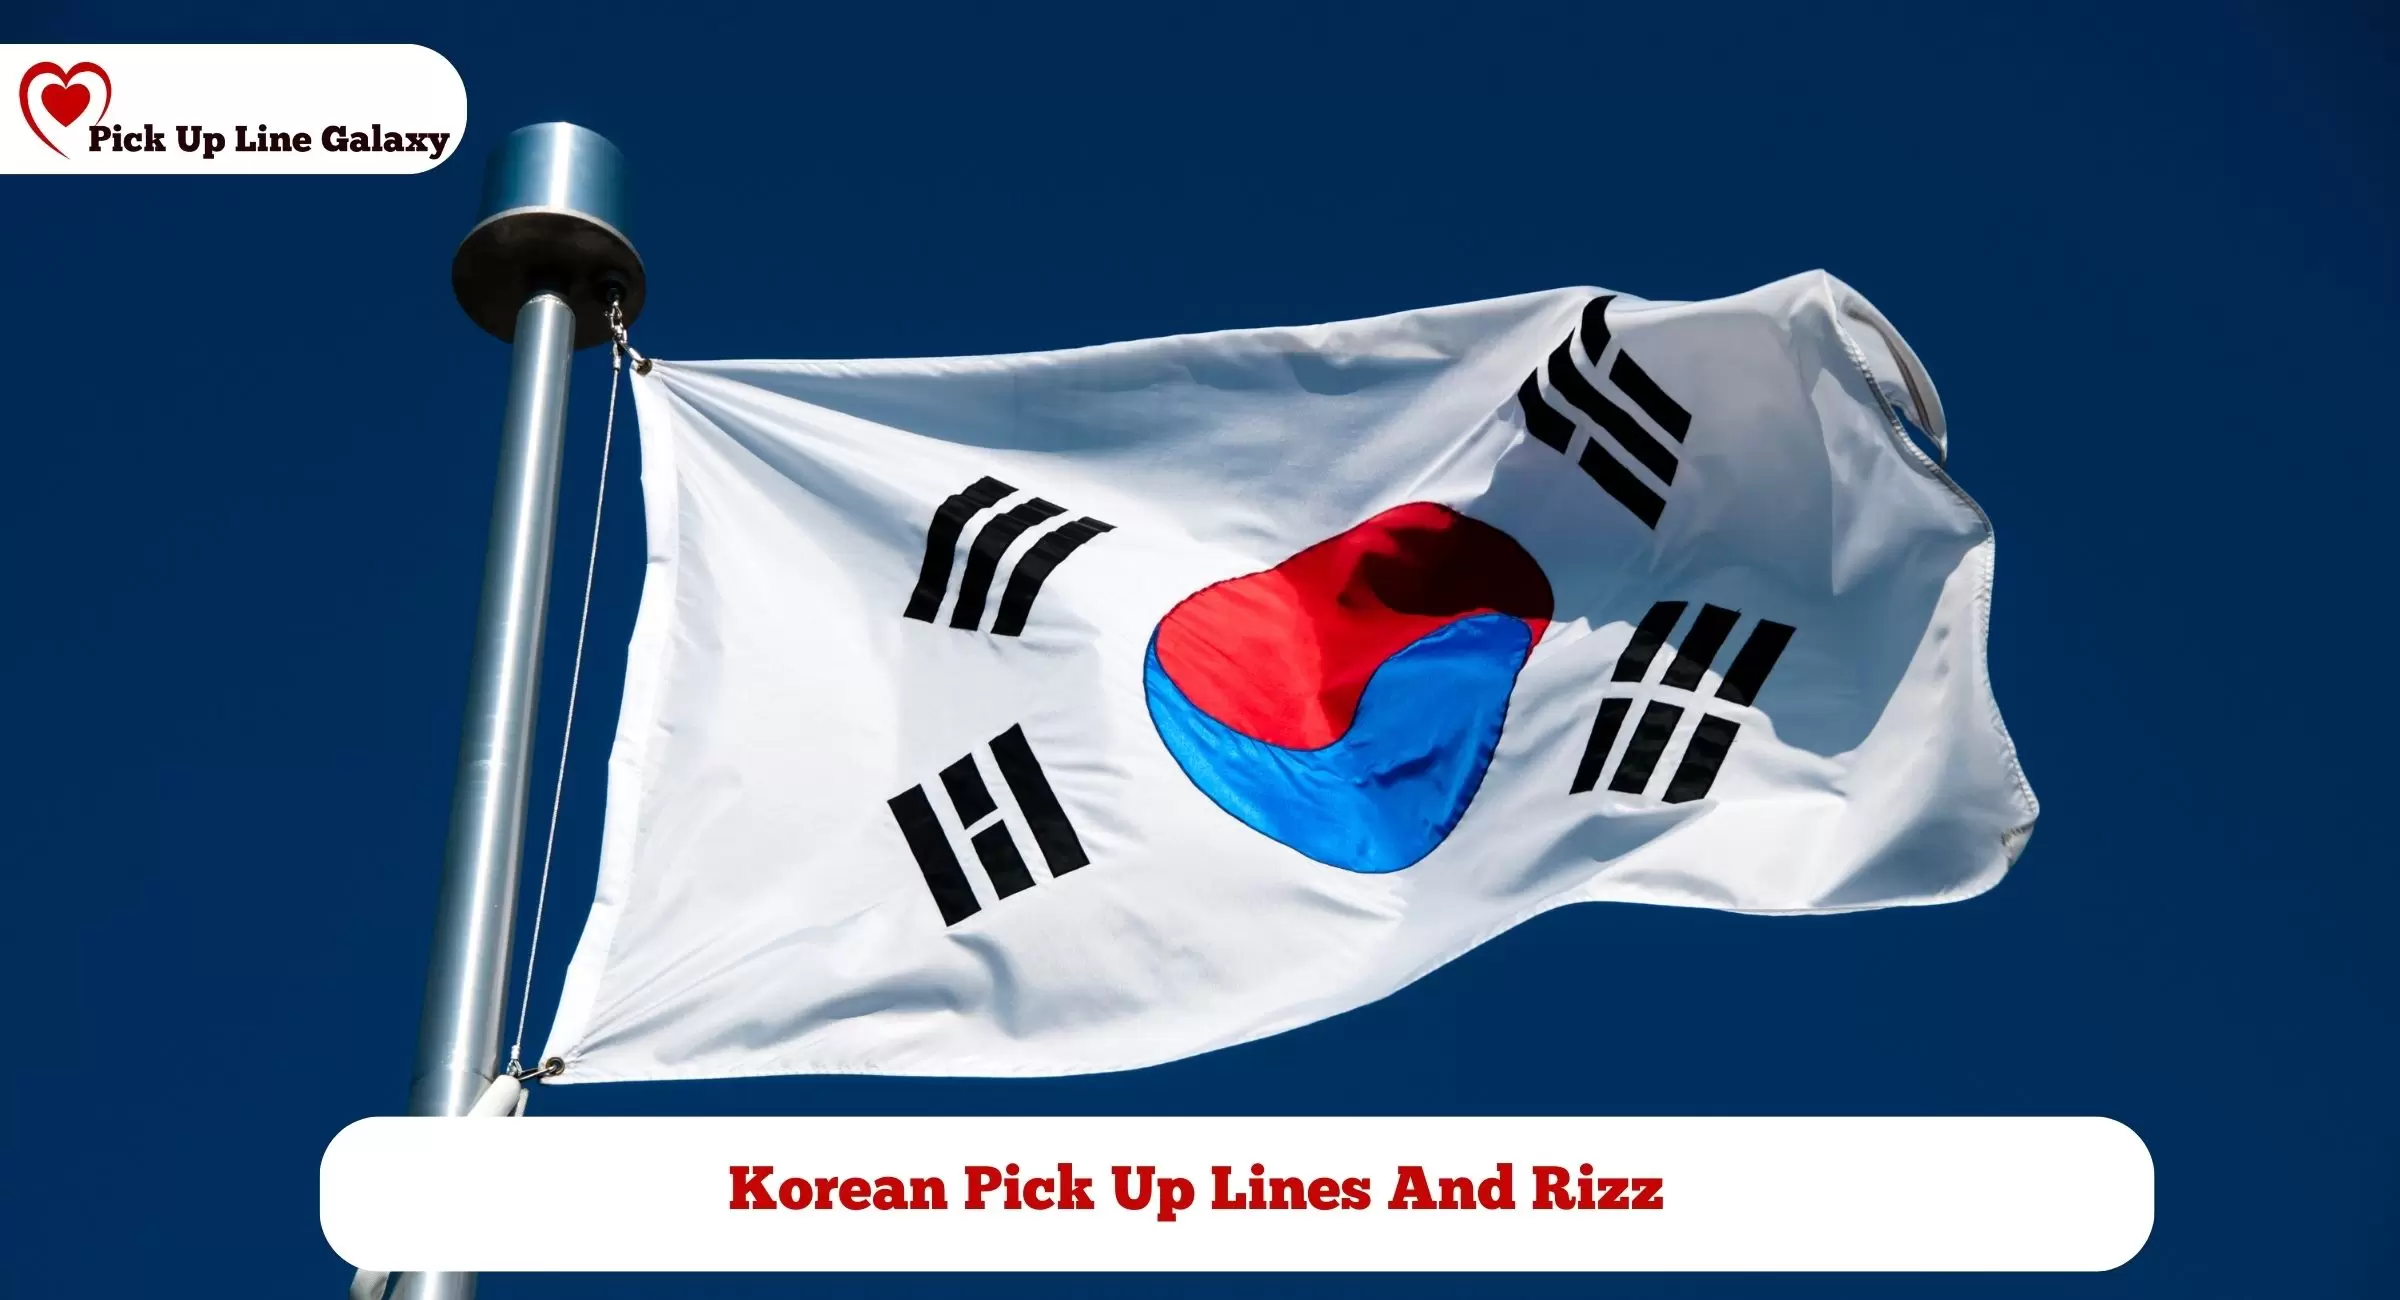 Korean Pick Up Lines And Rizz